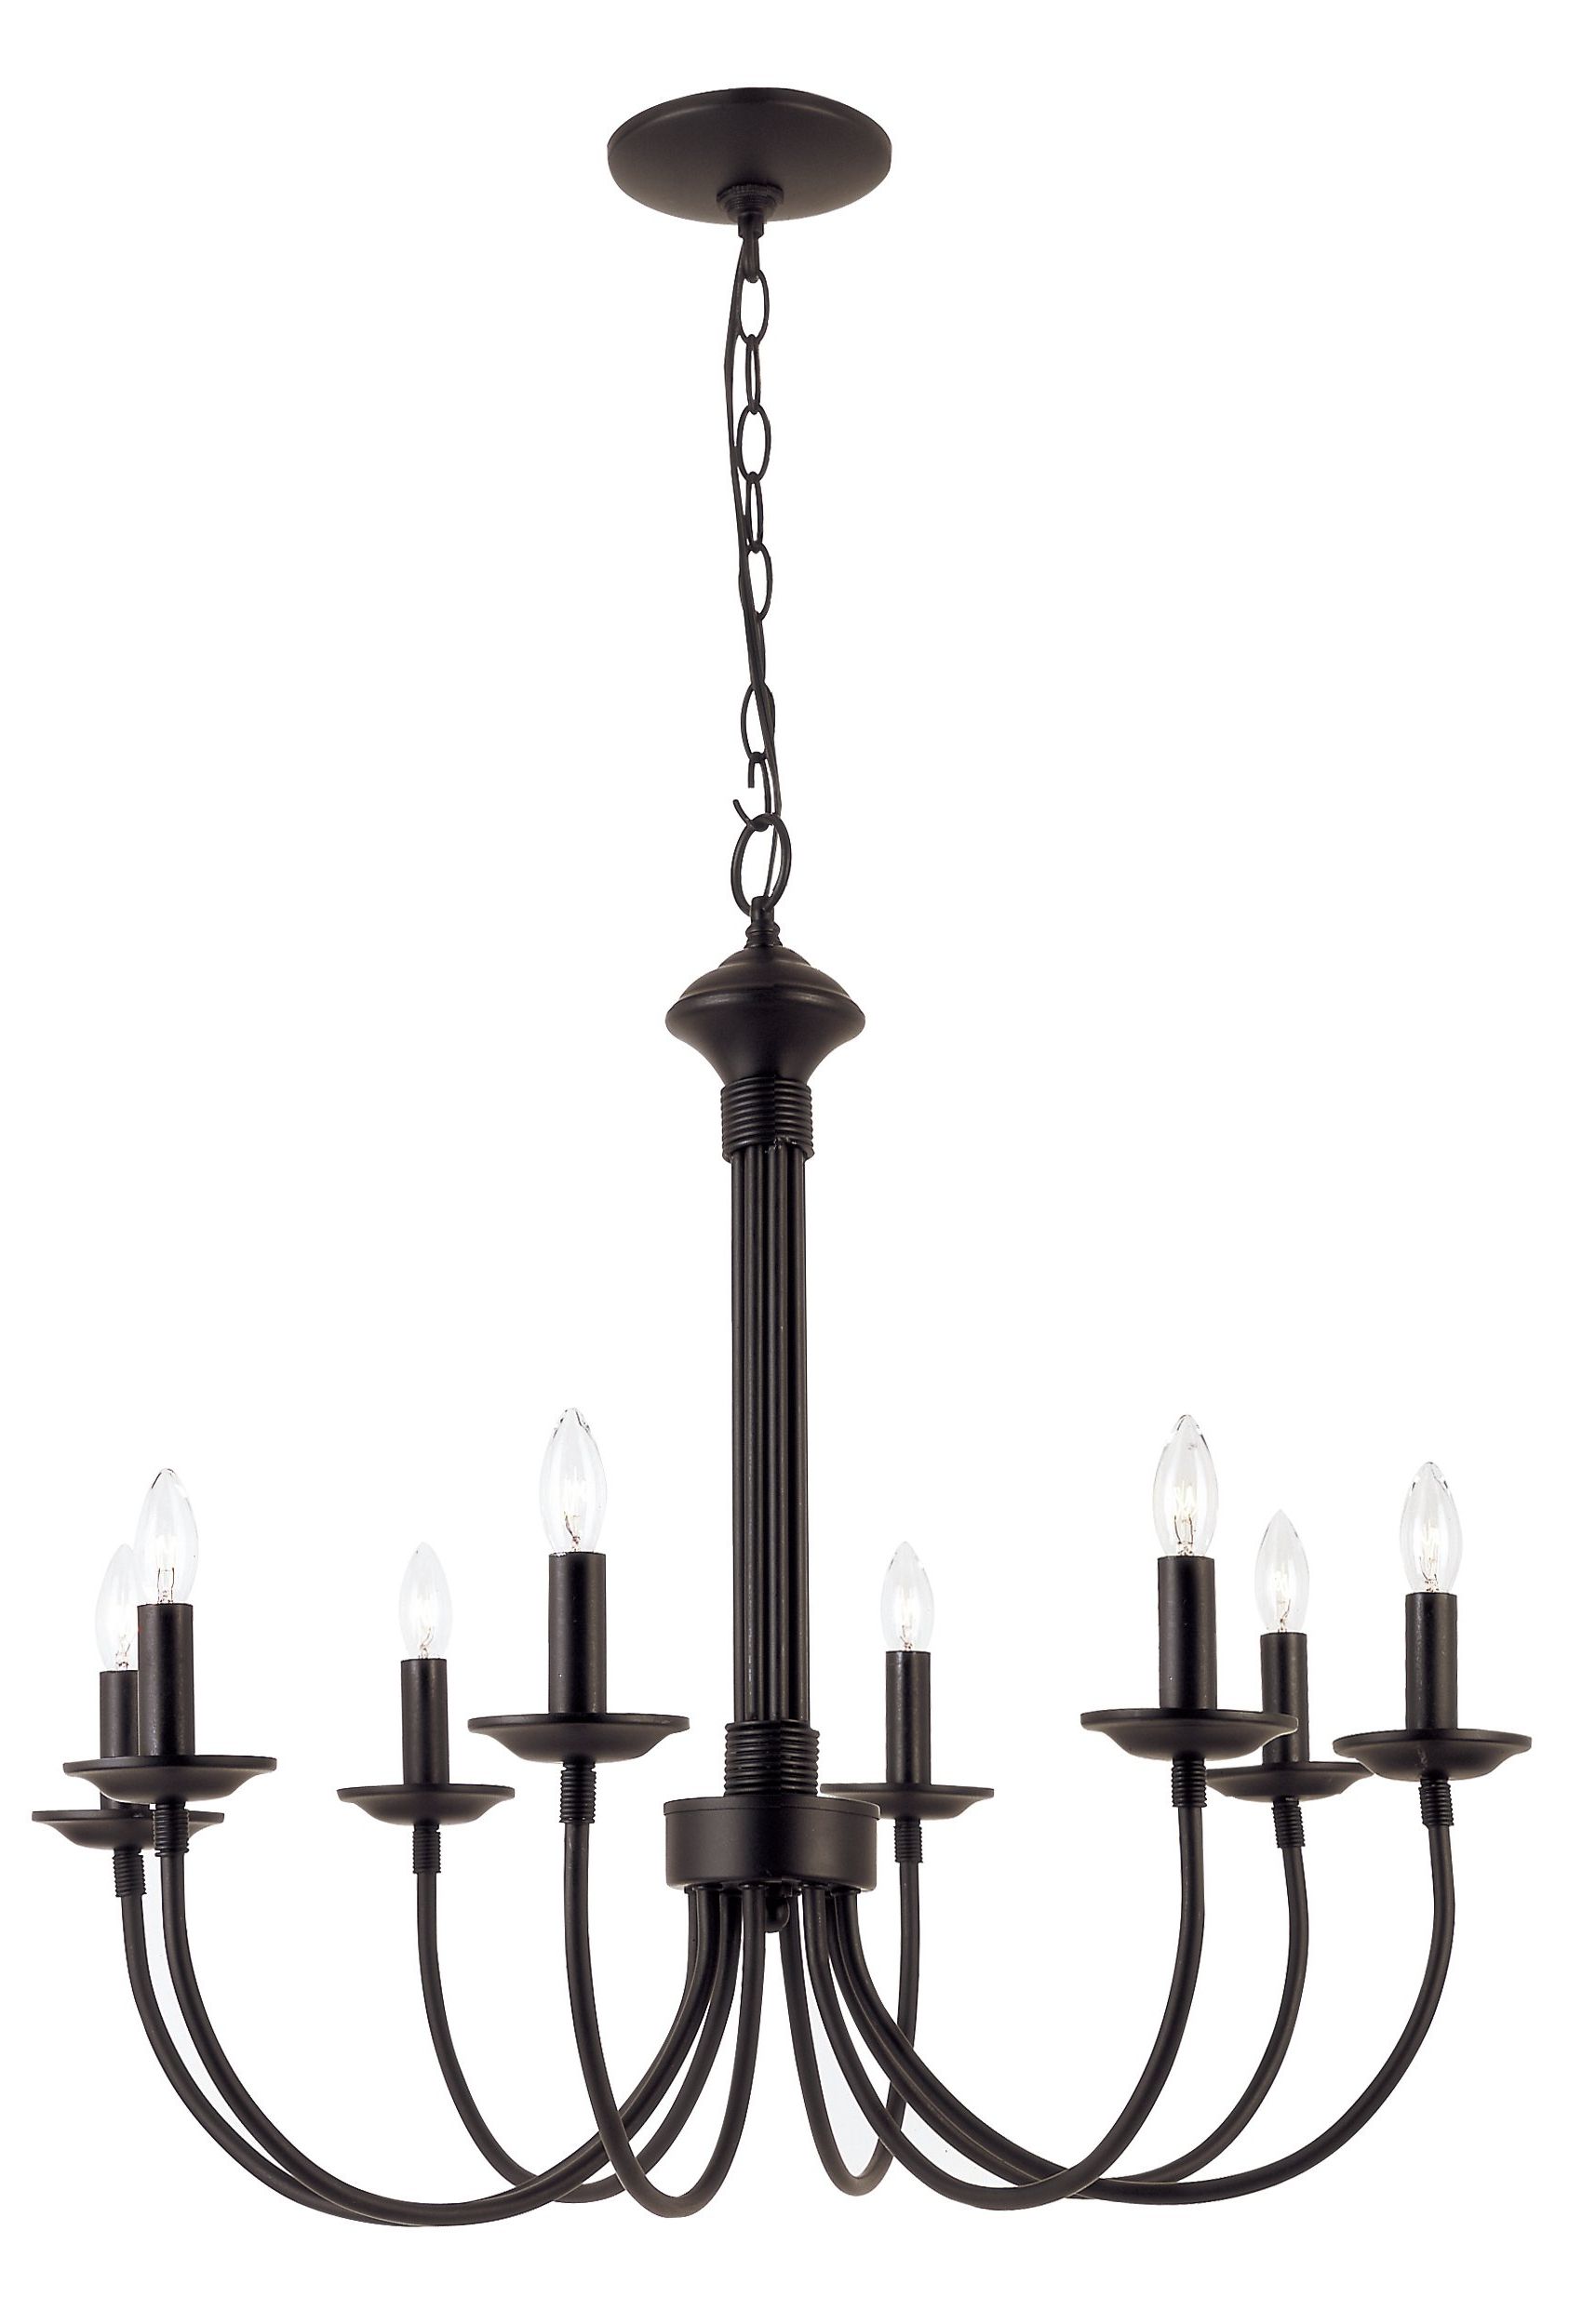 Shaylee 8 Light Candle Style Chandelier Pertaining To Popular Giverny 9 Light Candle Style Chandeliers (View 13 of 20)